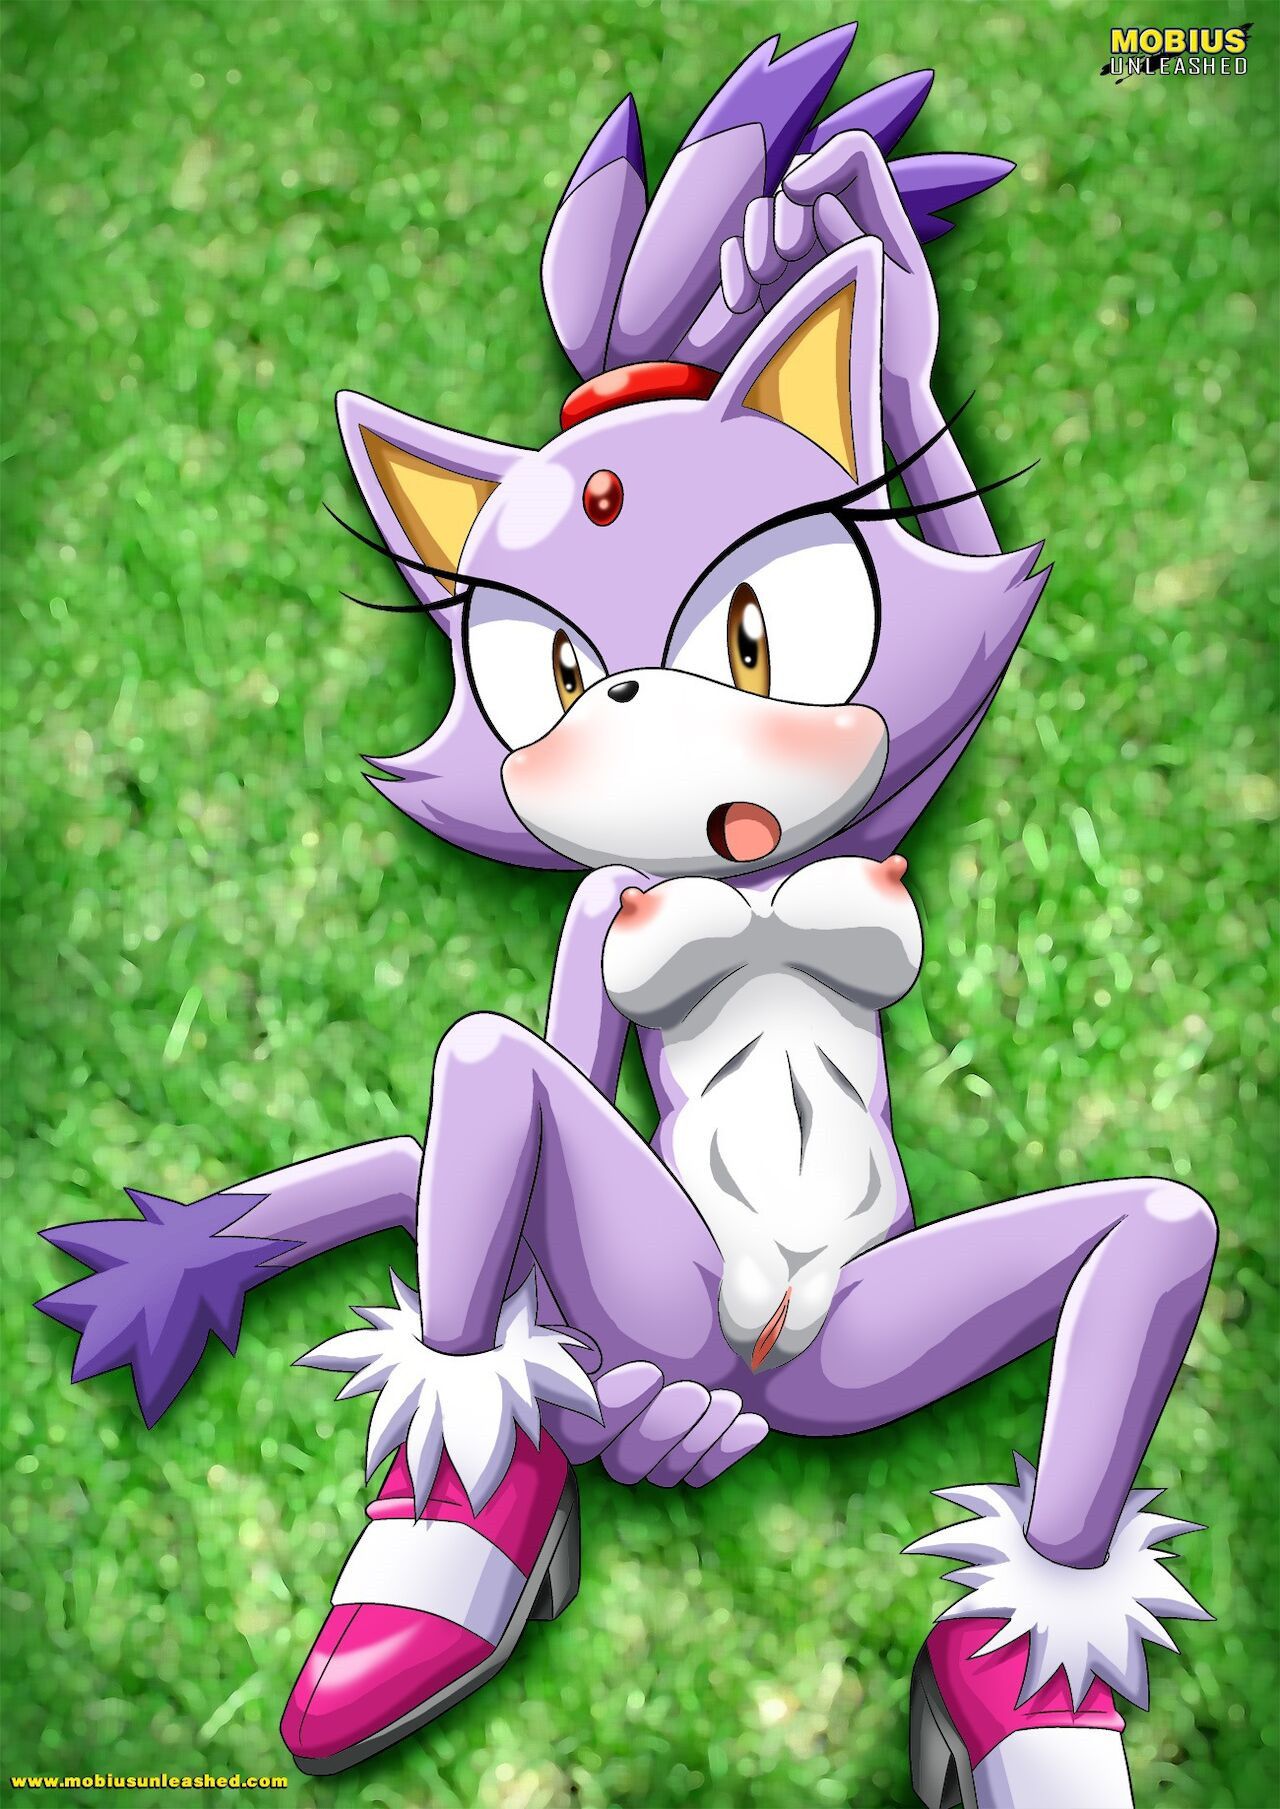 Mobius Unleashed: Blaze the Cat 1